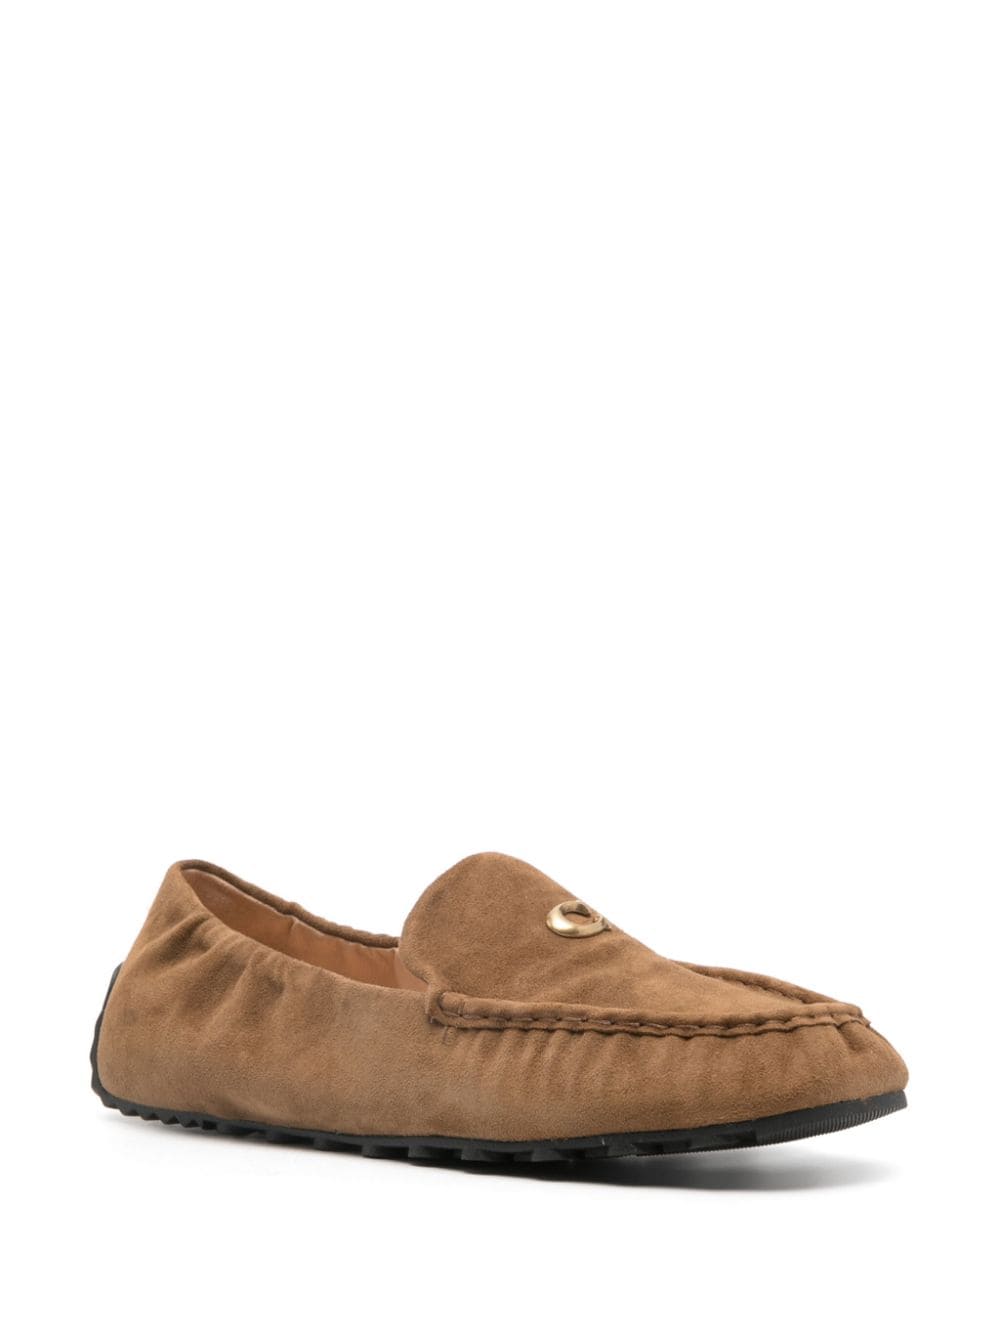 Coach Ronnie suede loafers - Bruin